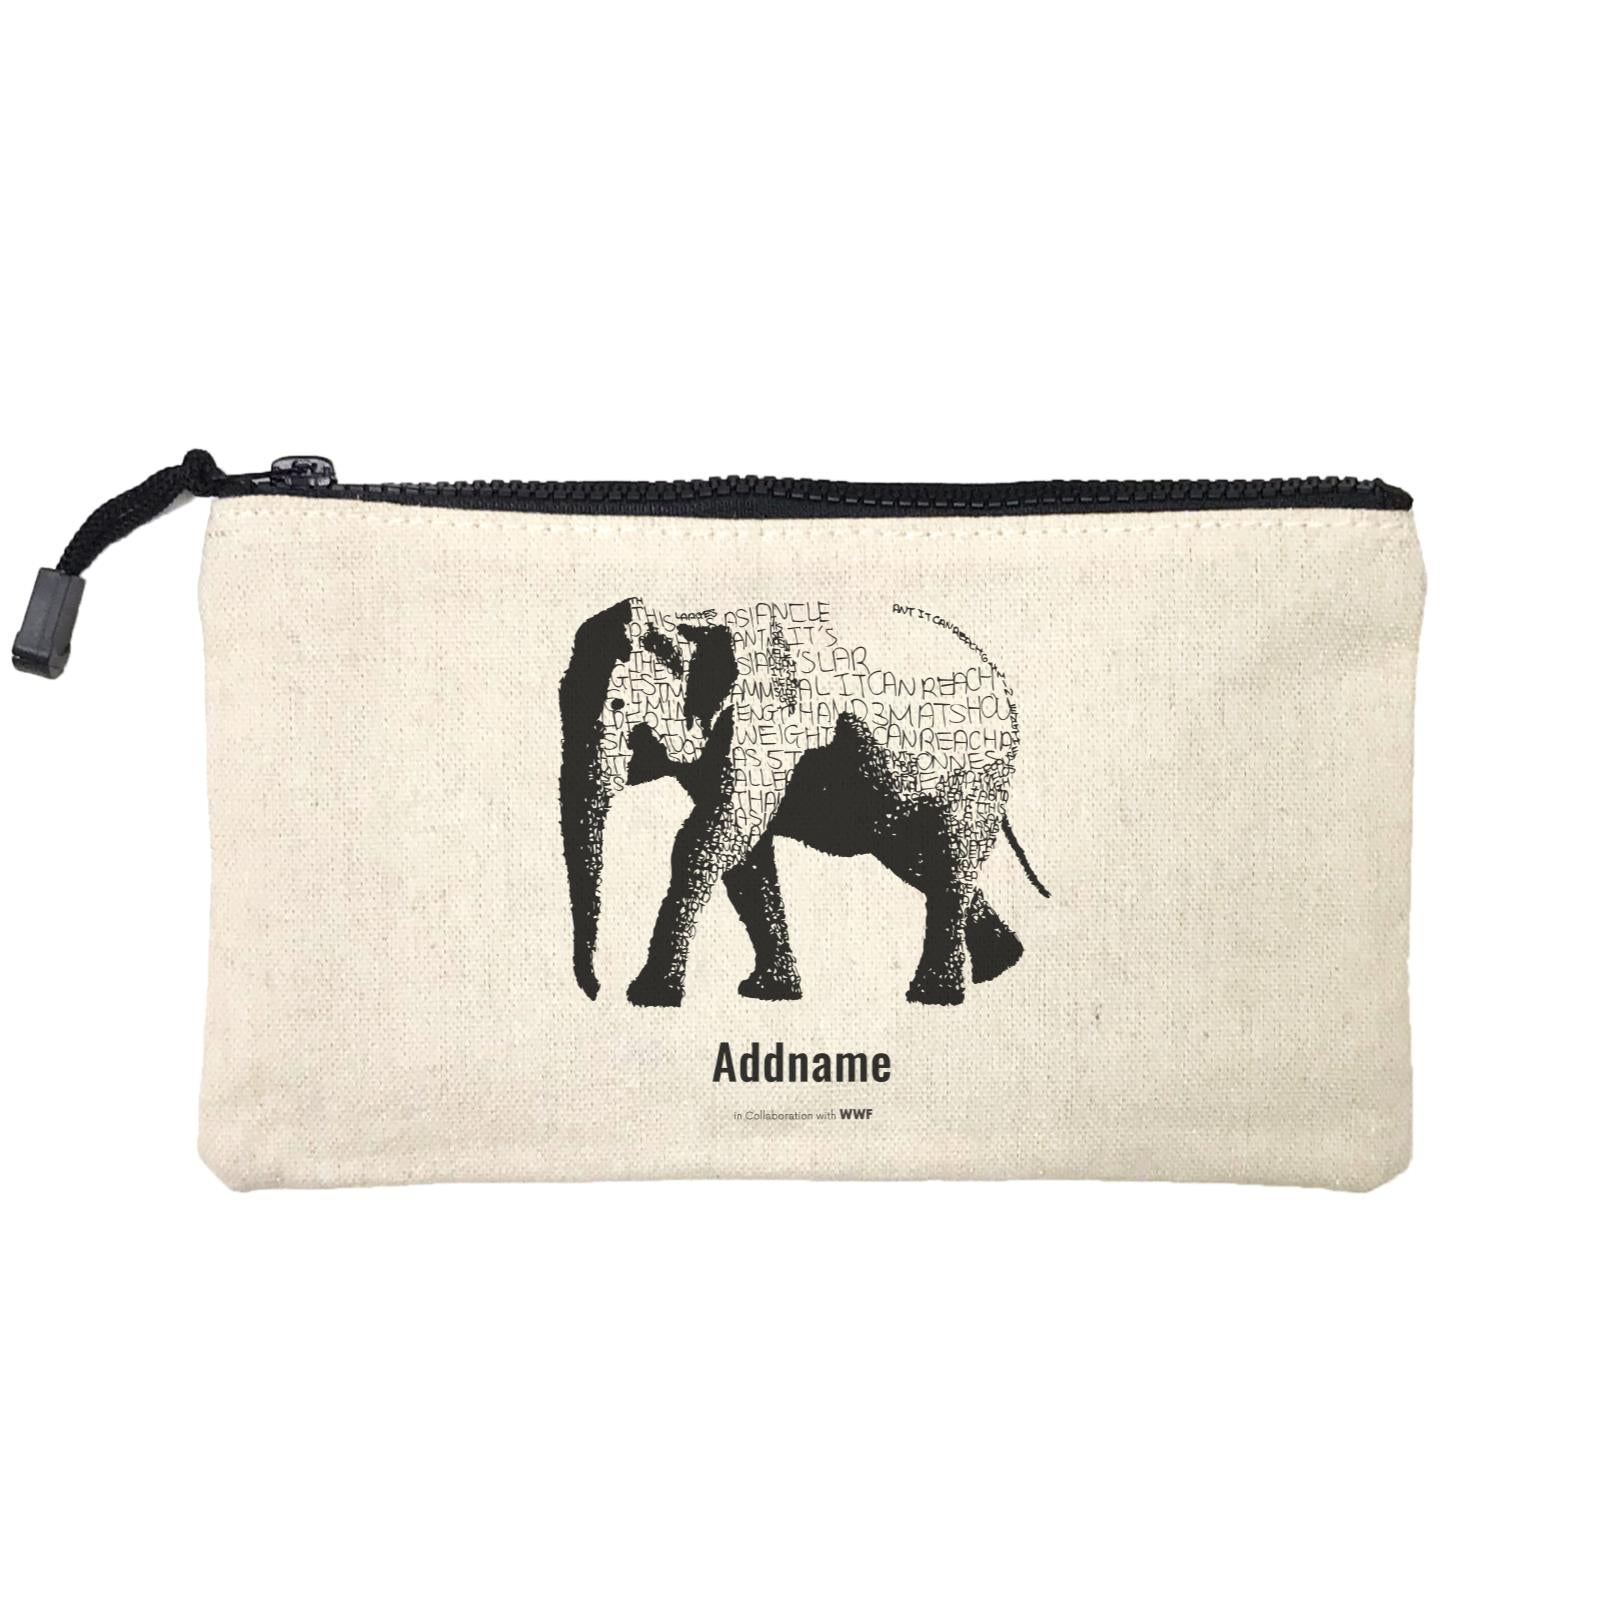 Hand Written Animals Asiatic Elephant By ArtC Addname Mini Accessories Stationery Pouch